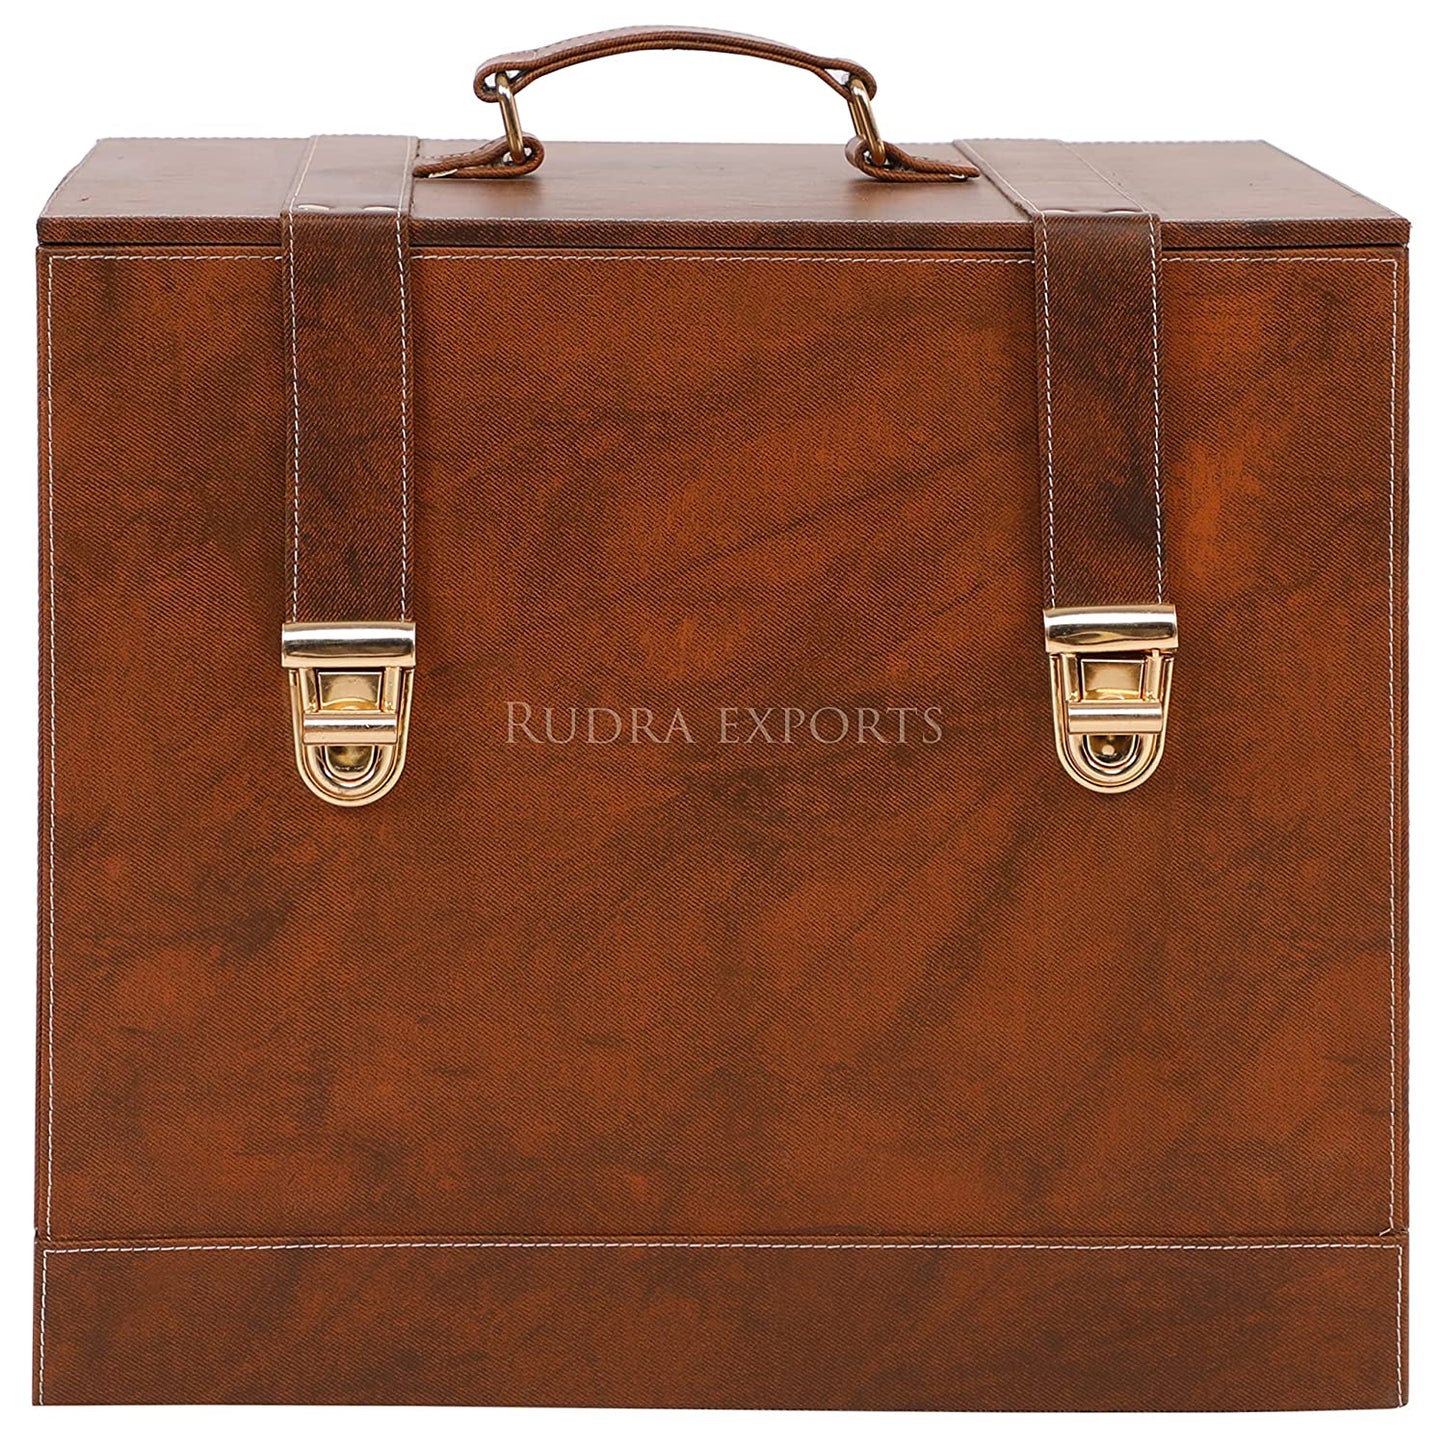 Rudra Exports Table Top Vegan Leather Portable Bar Box with Accessories Set & 4 Whisky Glasses | Min Bar for Home (Brown & Brown)